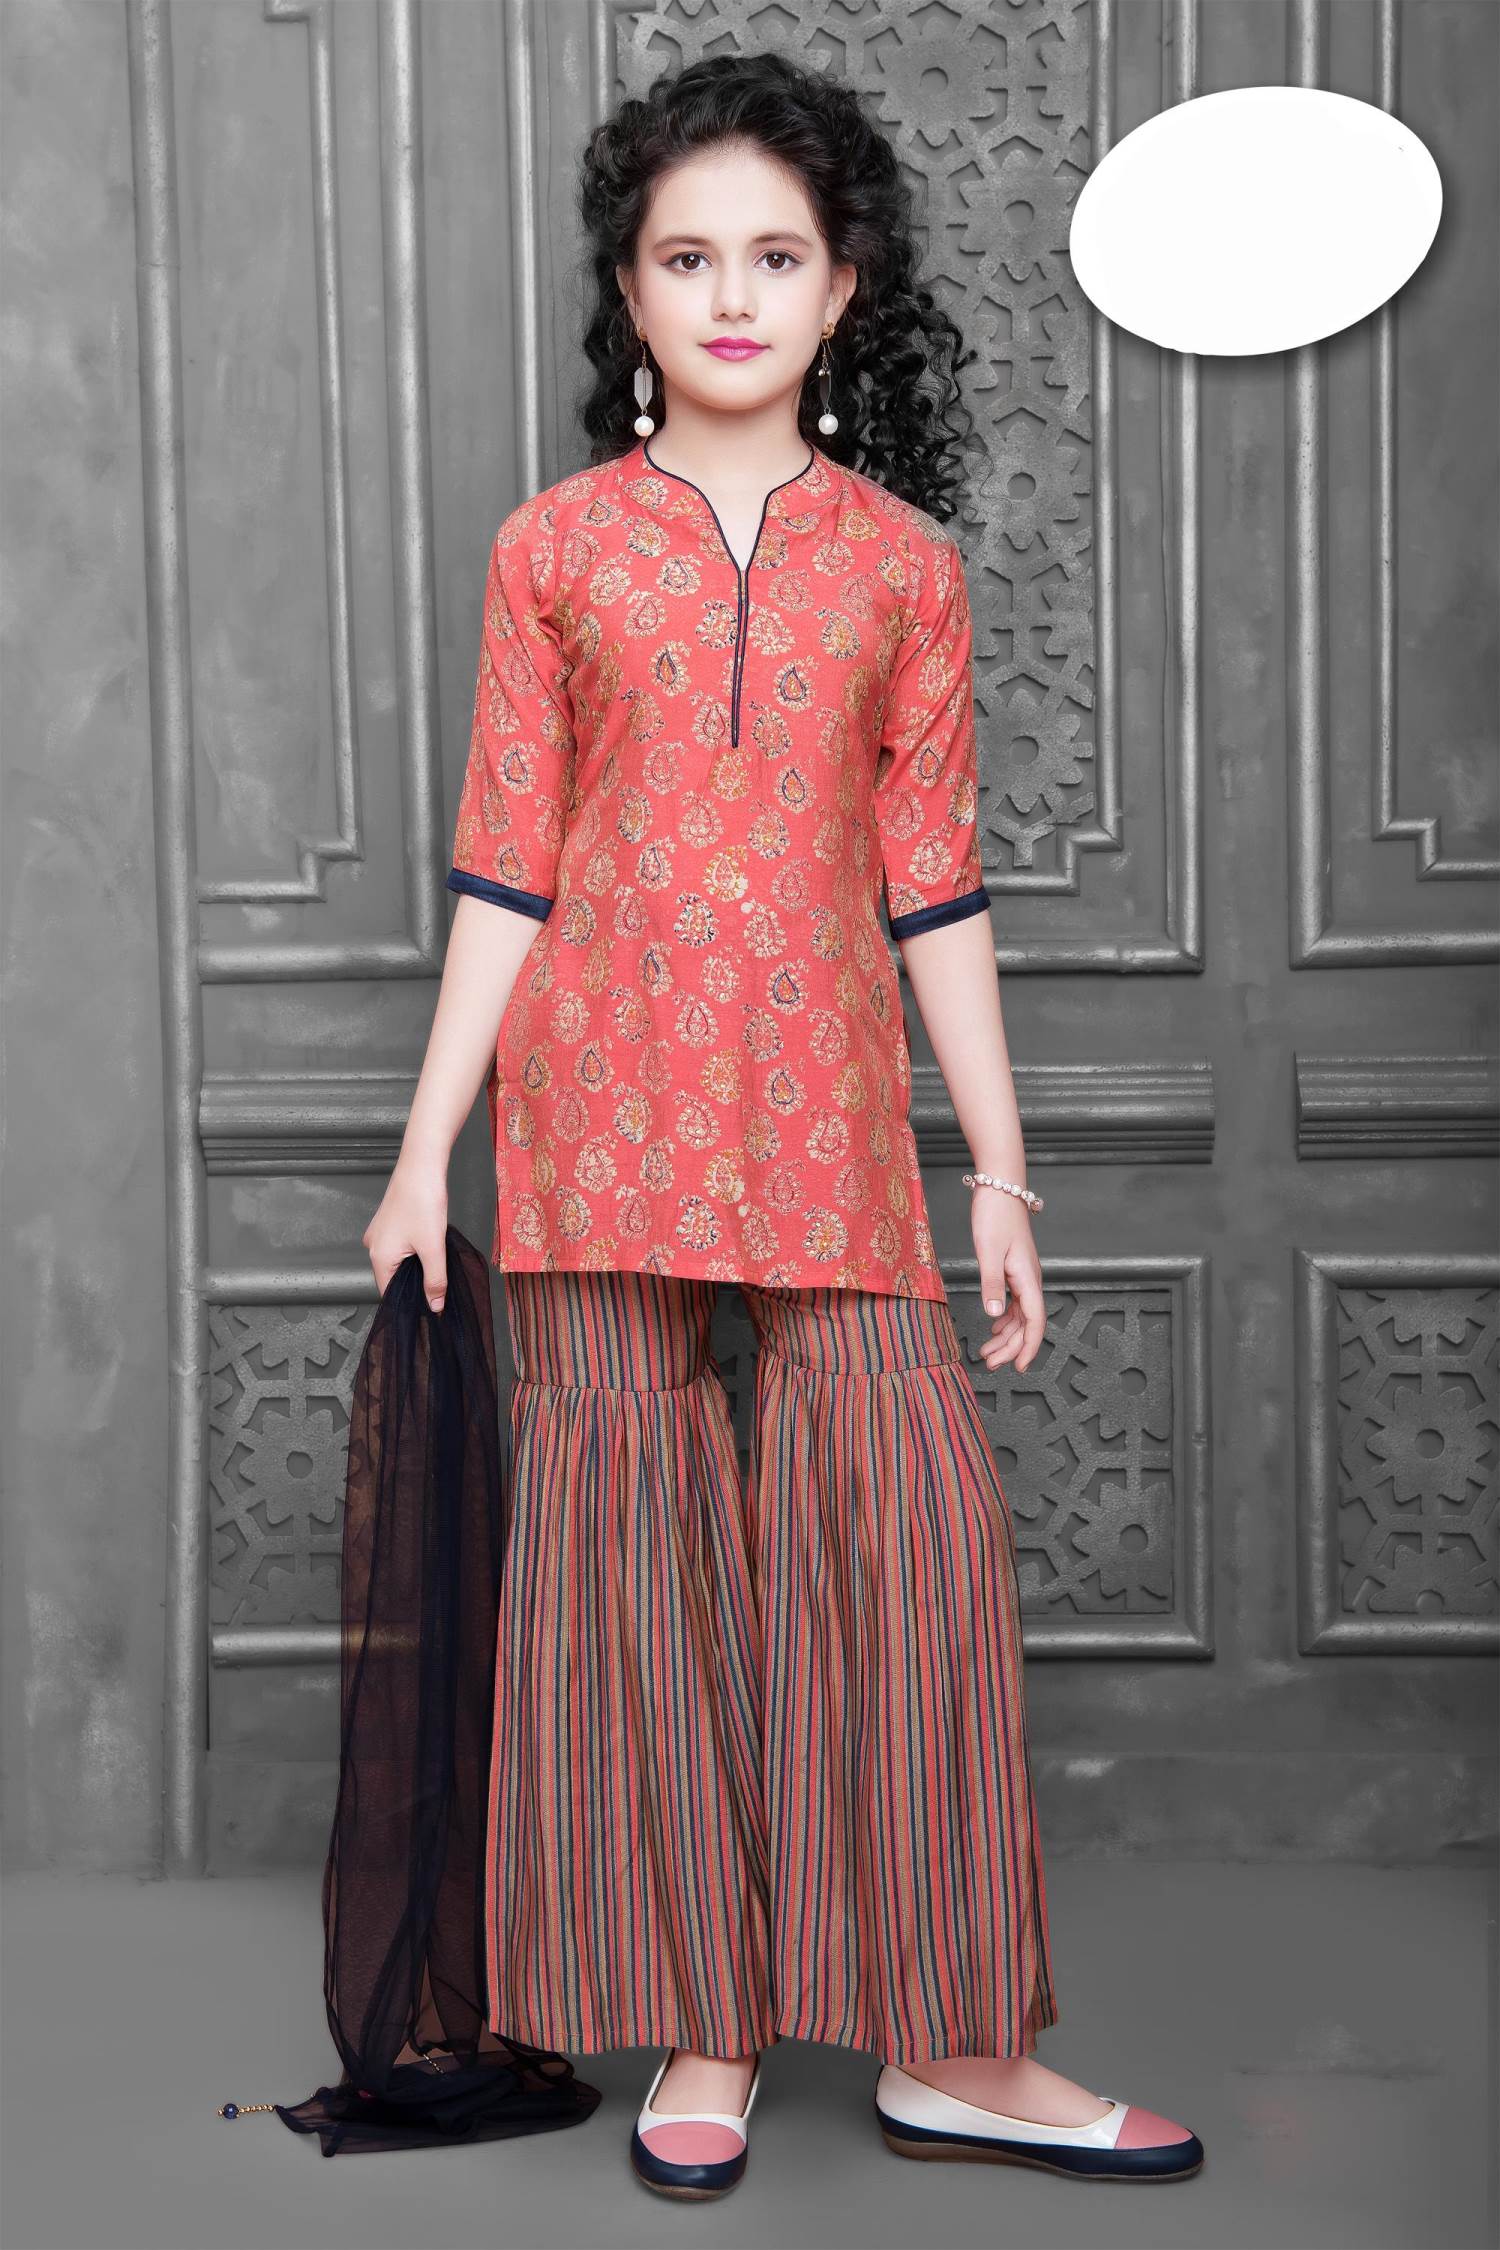 Women Embroidered Frock Style bell Sleeve Party Wear Anarkali Cotton Kurti  With Dupatta in Patna at best price by prativa solution pvt ltd - Justdial